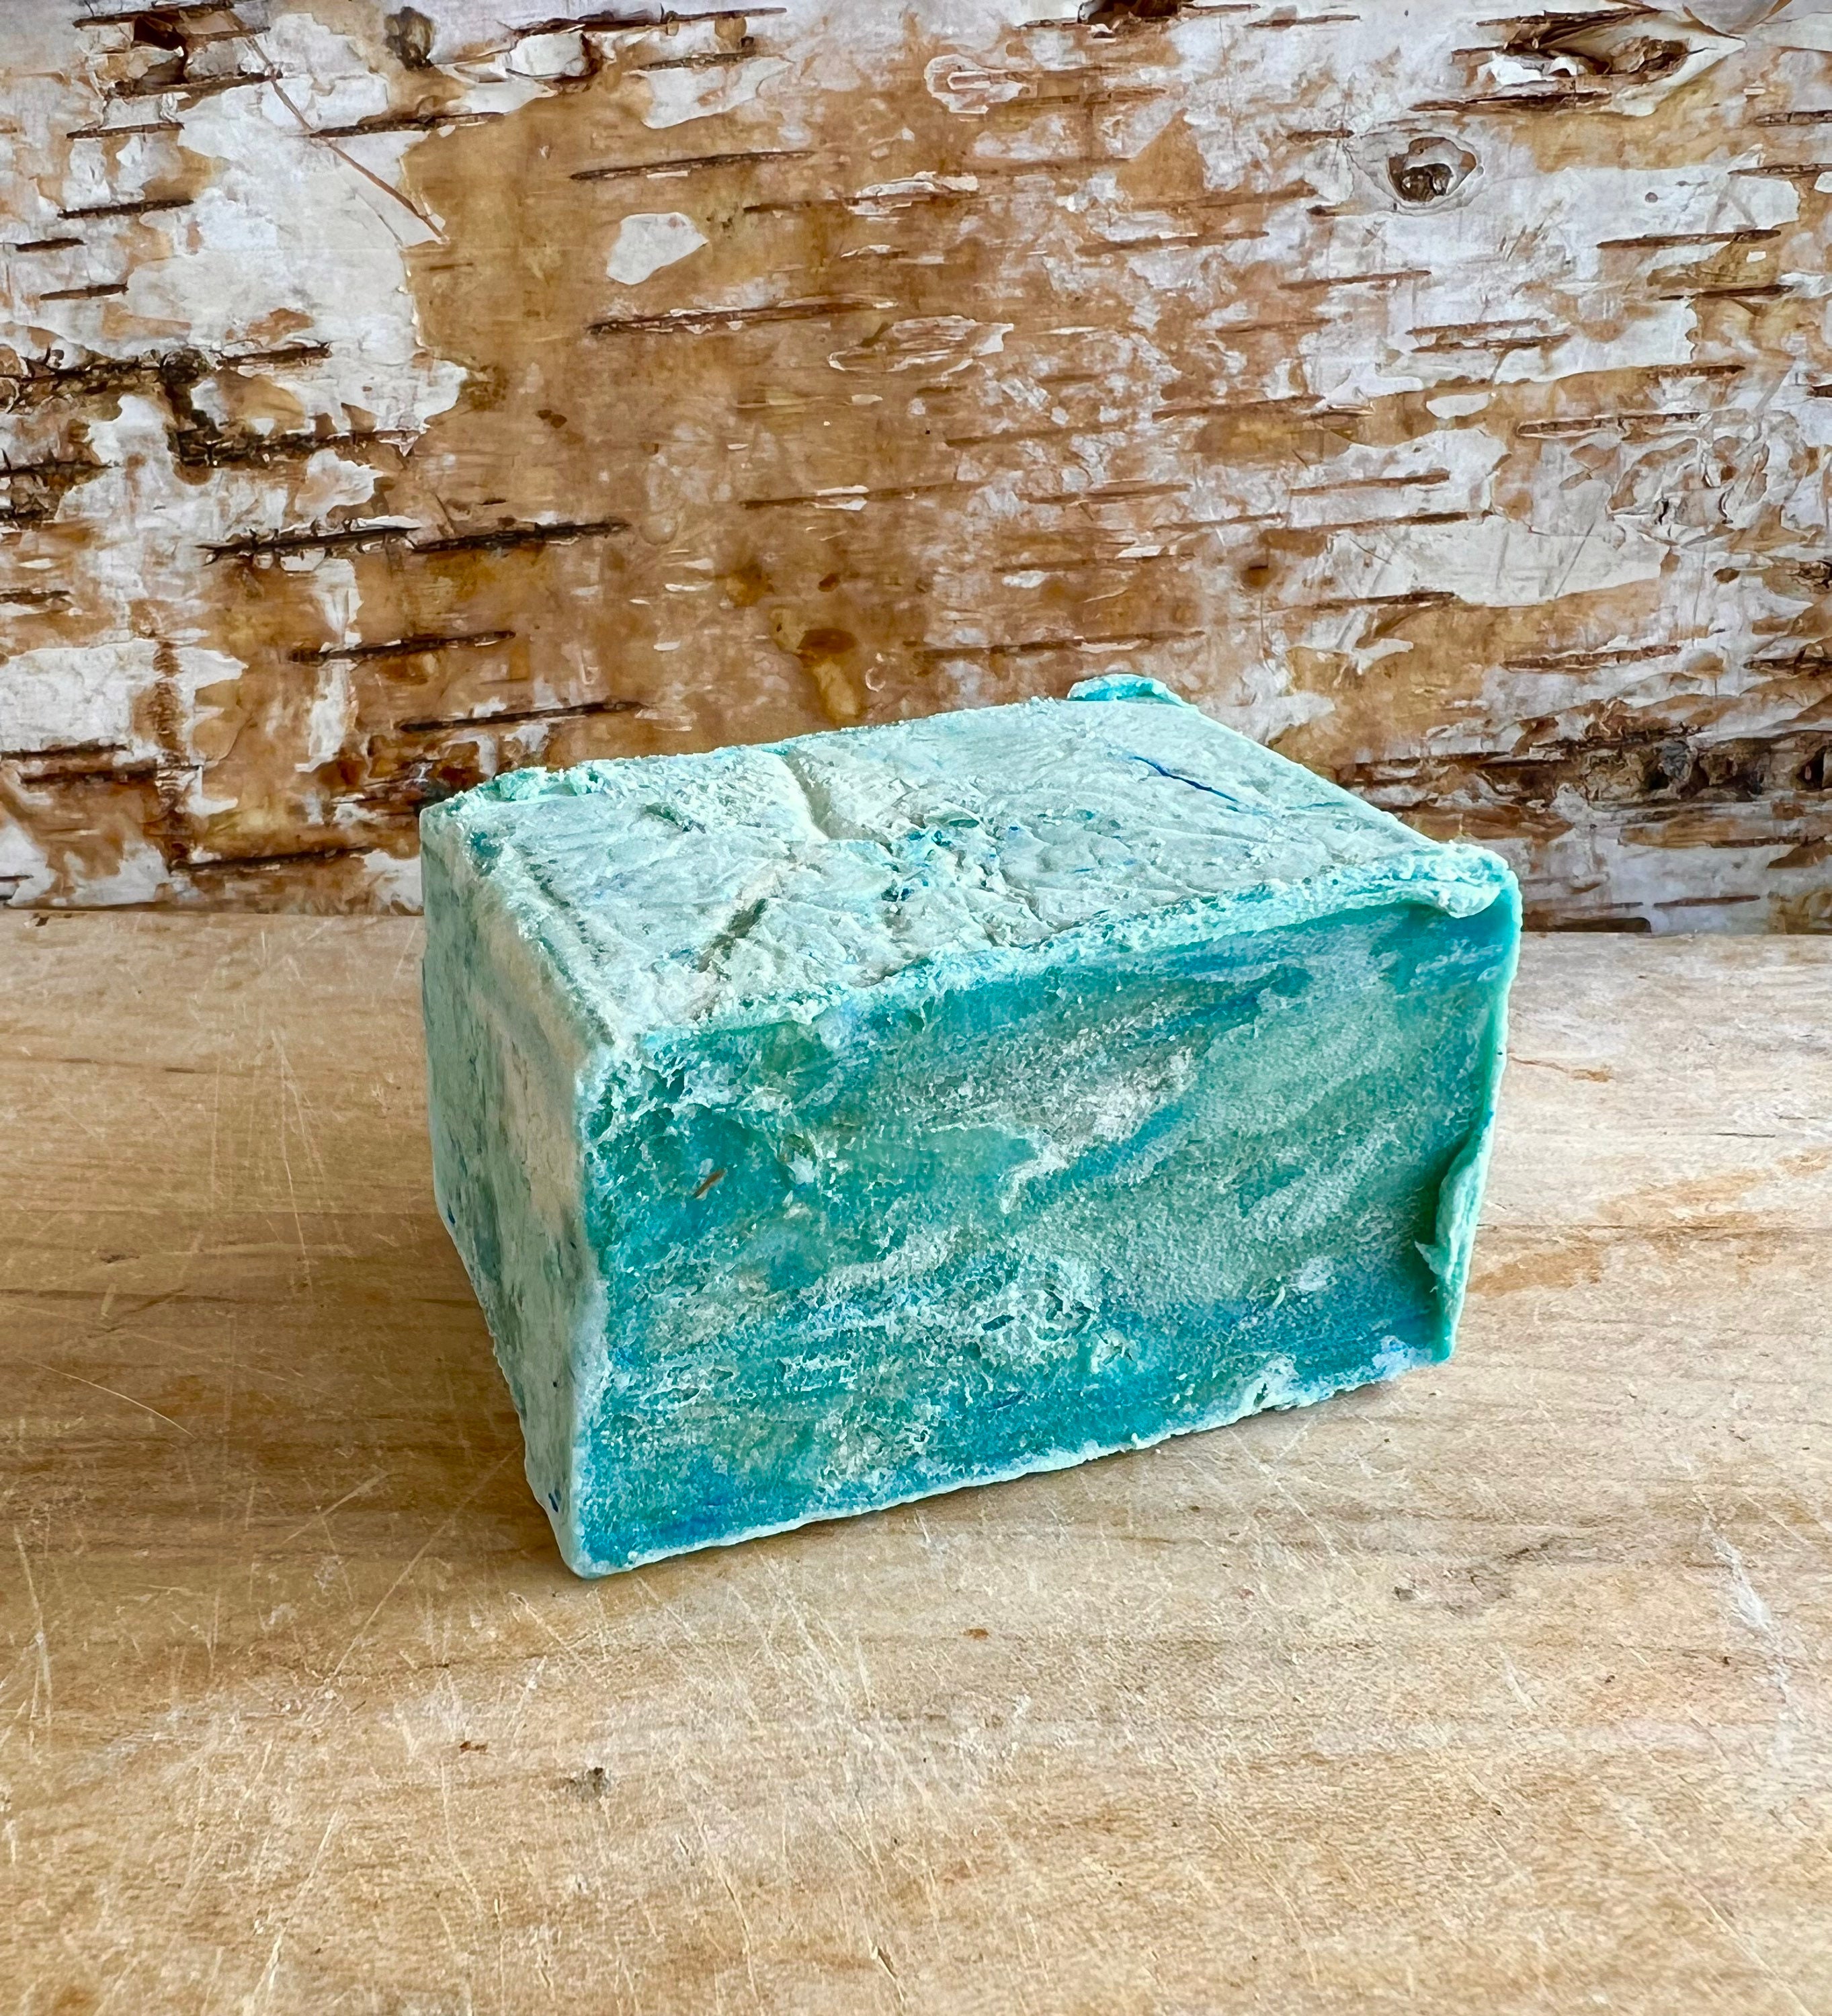 Captain Spike's Nag Champa Olive Oil Soap – Simply Marcella